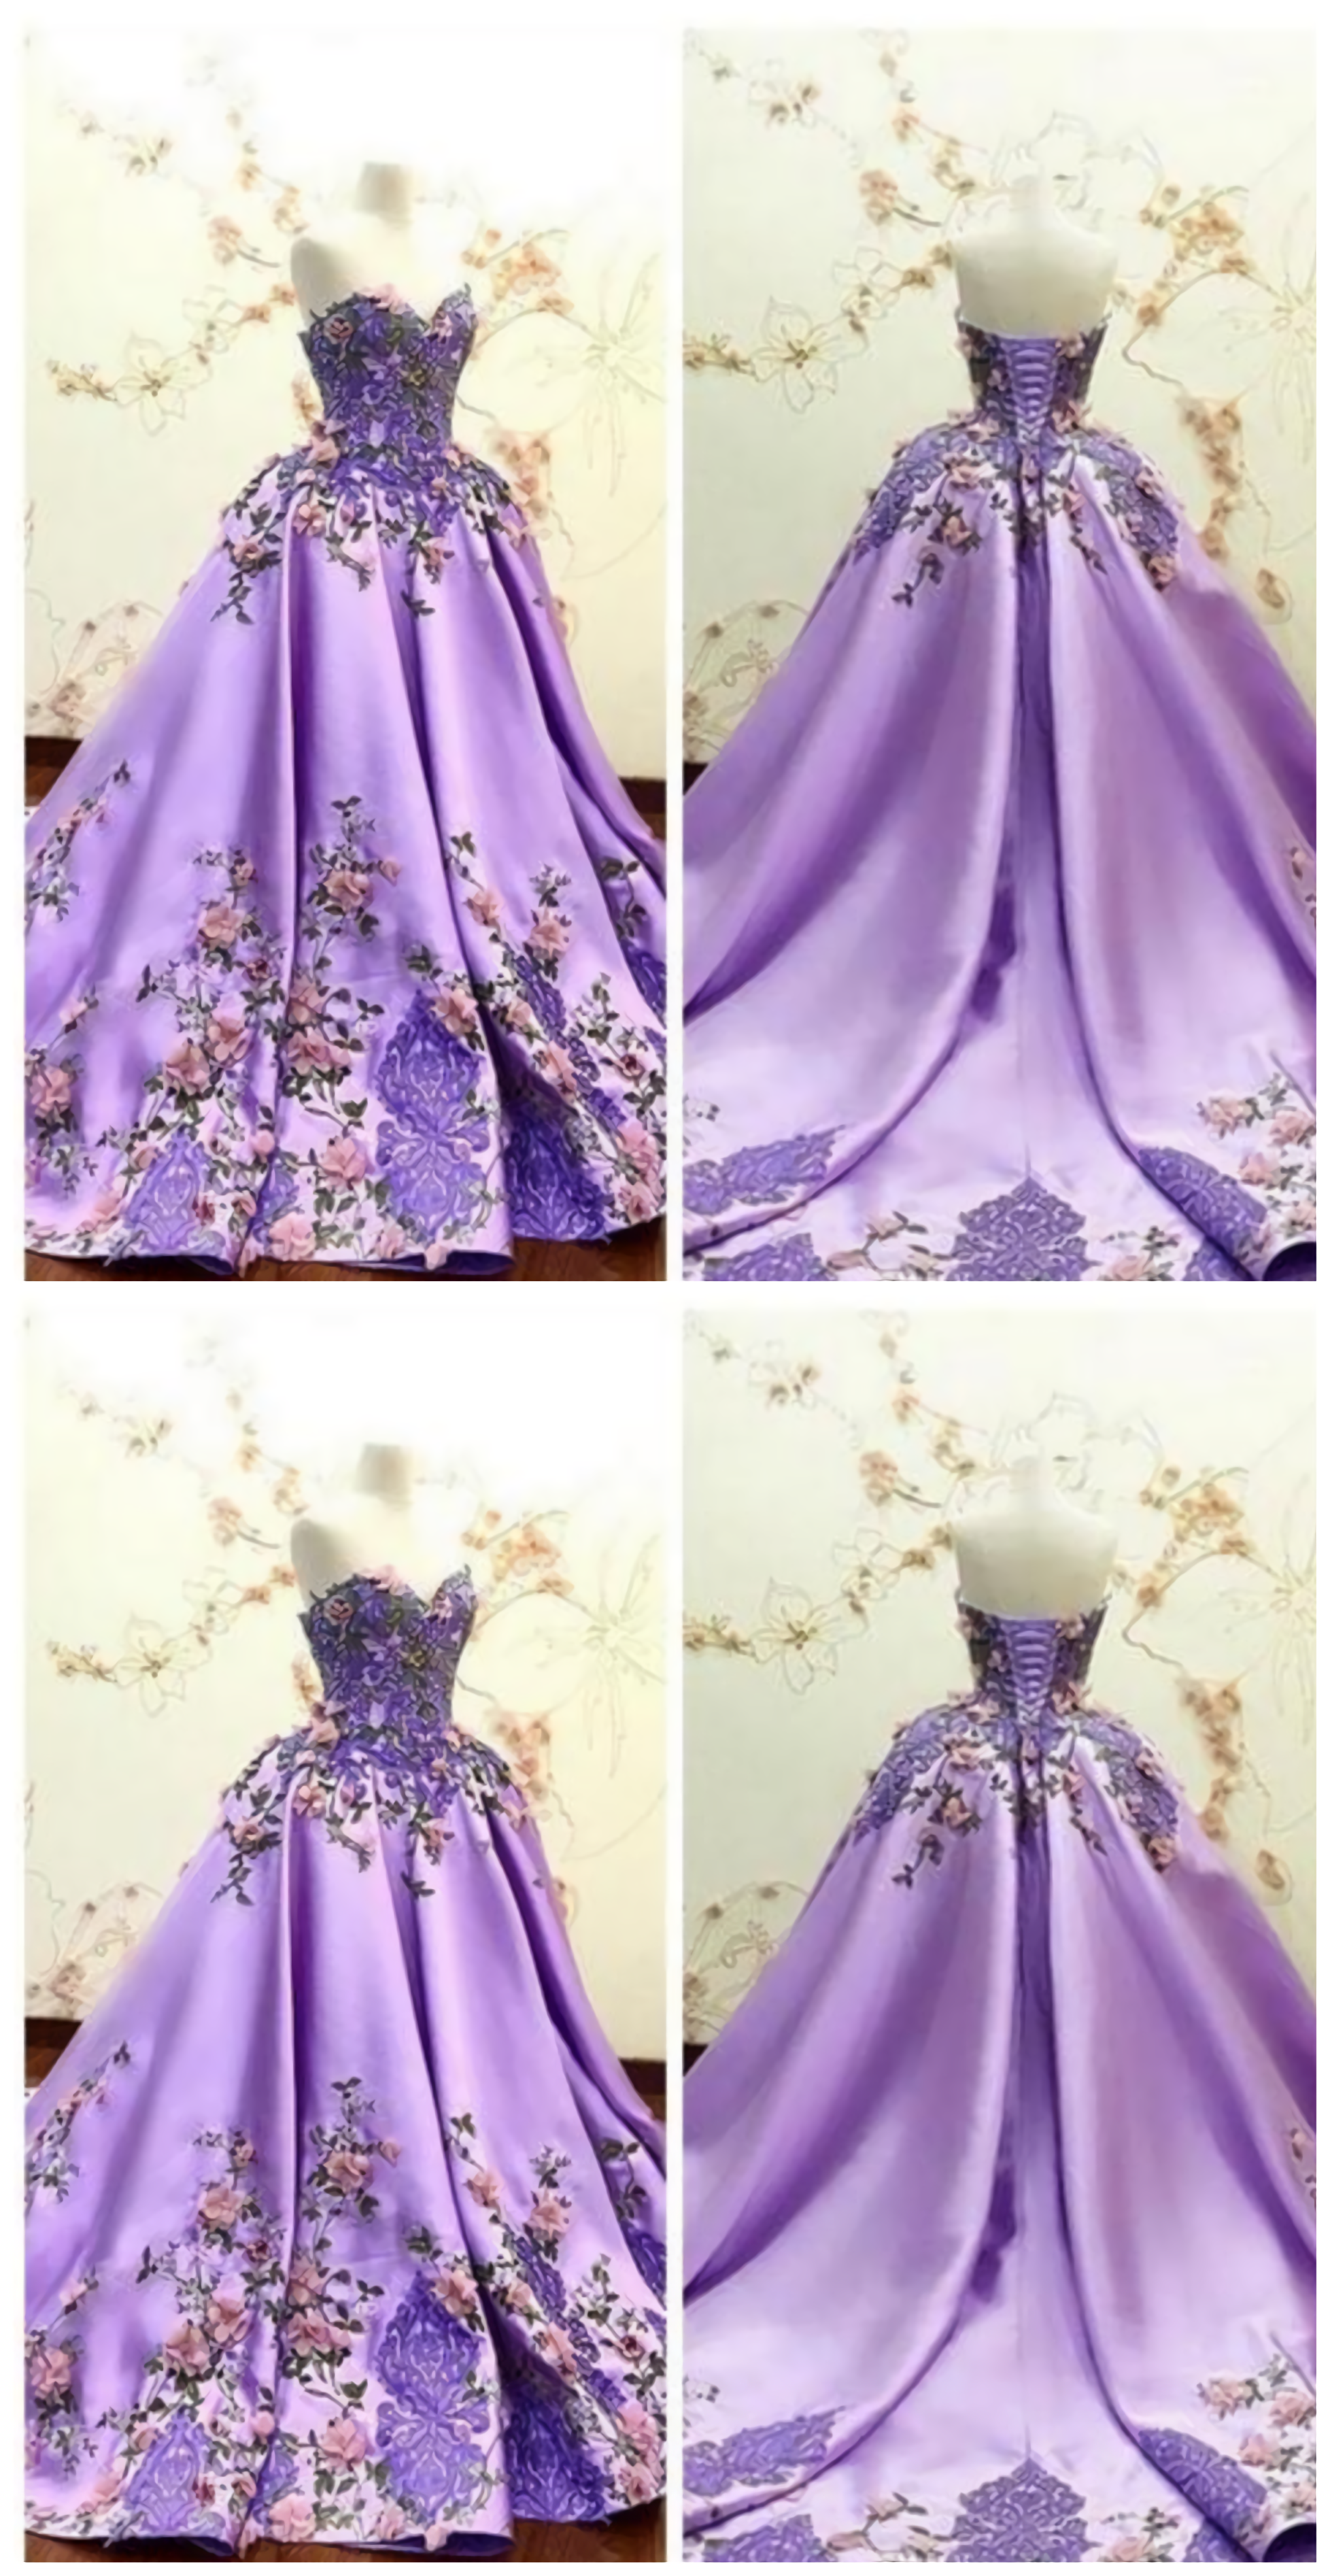 Beautiful Sweetheart 3D Flowers Adorned Corset Prom Dresses, Embroidery Satin Lace Appliques Bandage Corset Formal Special Occasion Evening Party Gowns Outfits, Evening Dresses For Over 63S